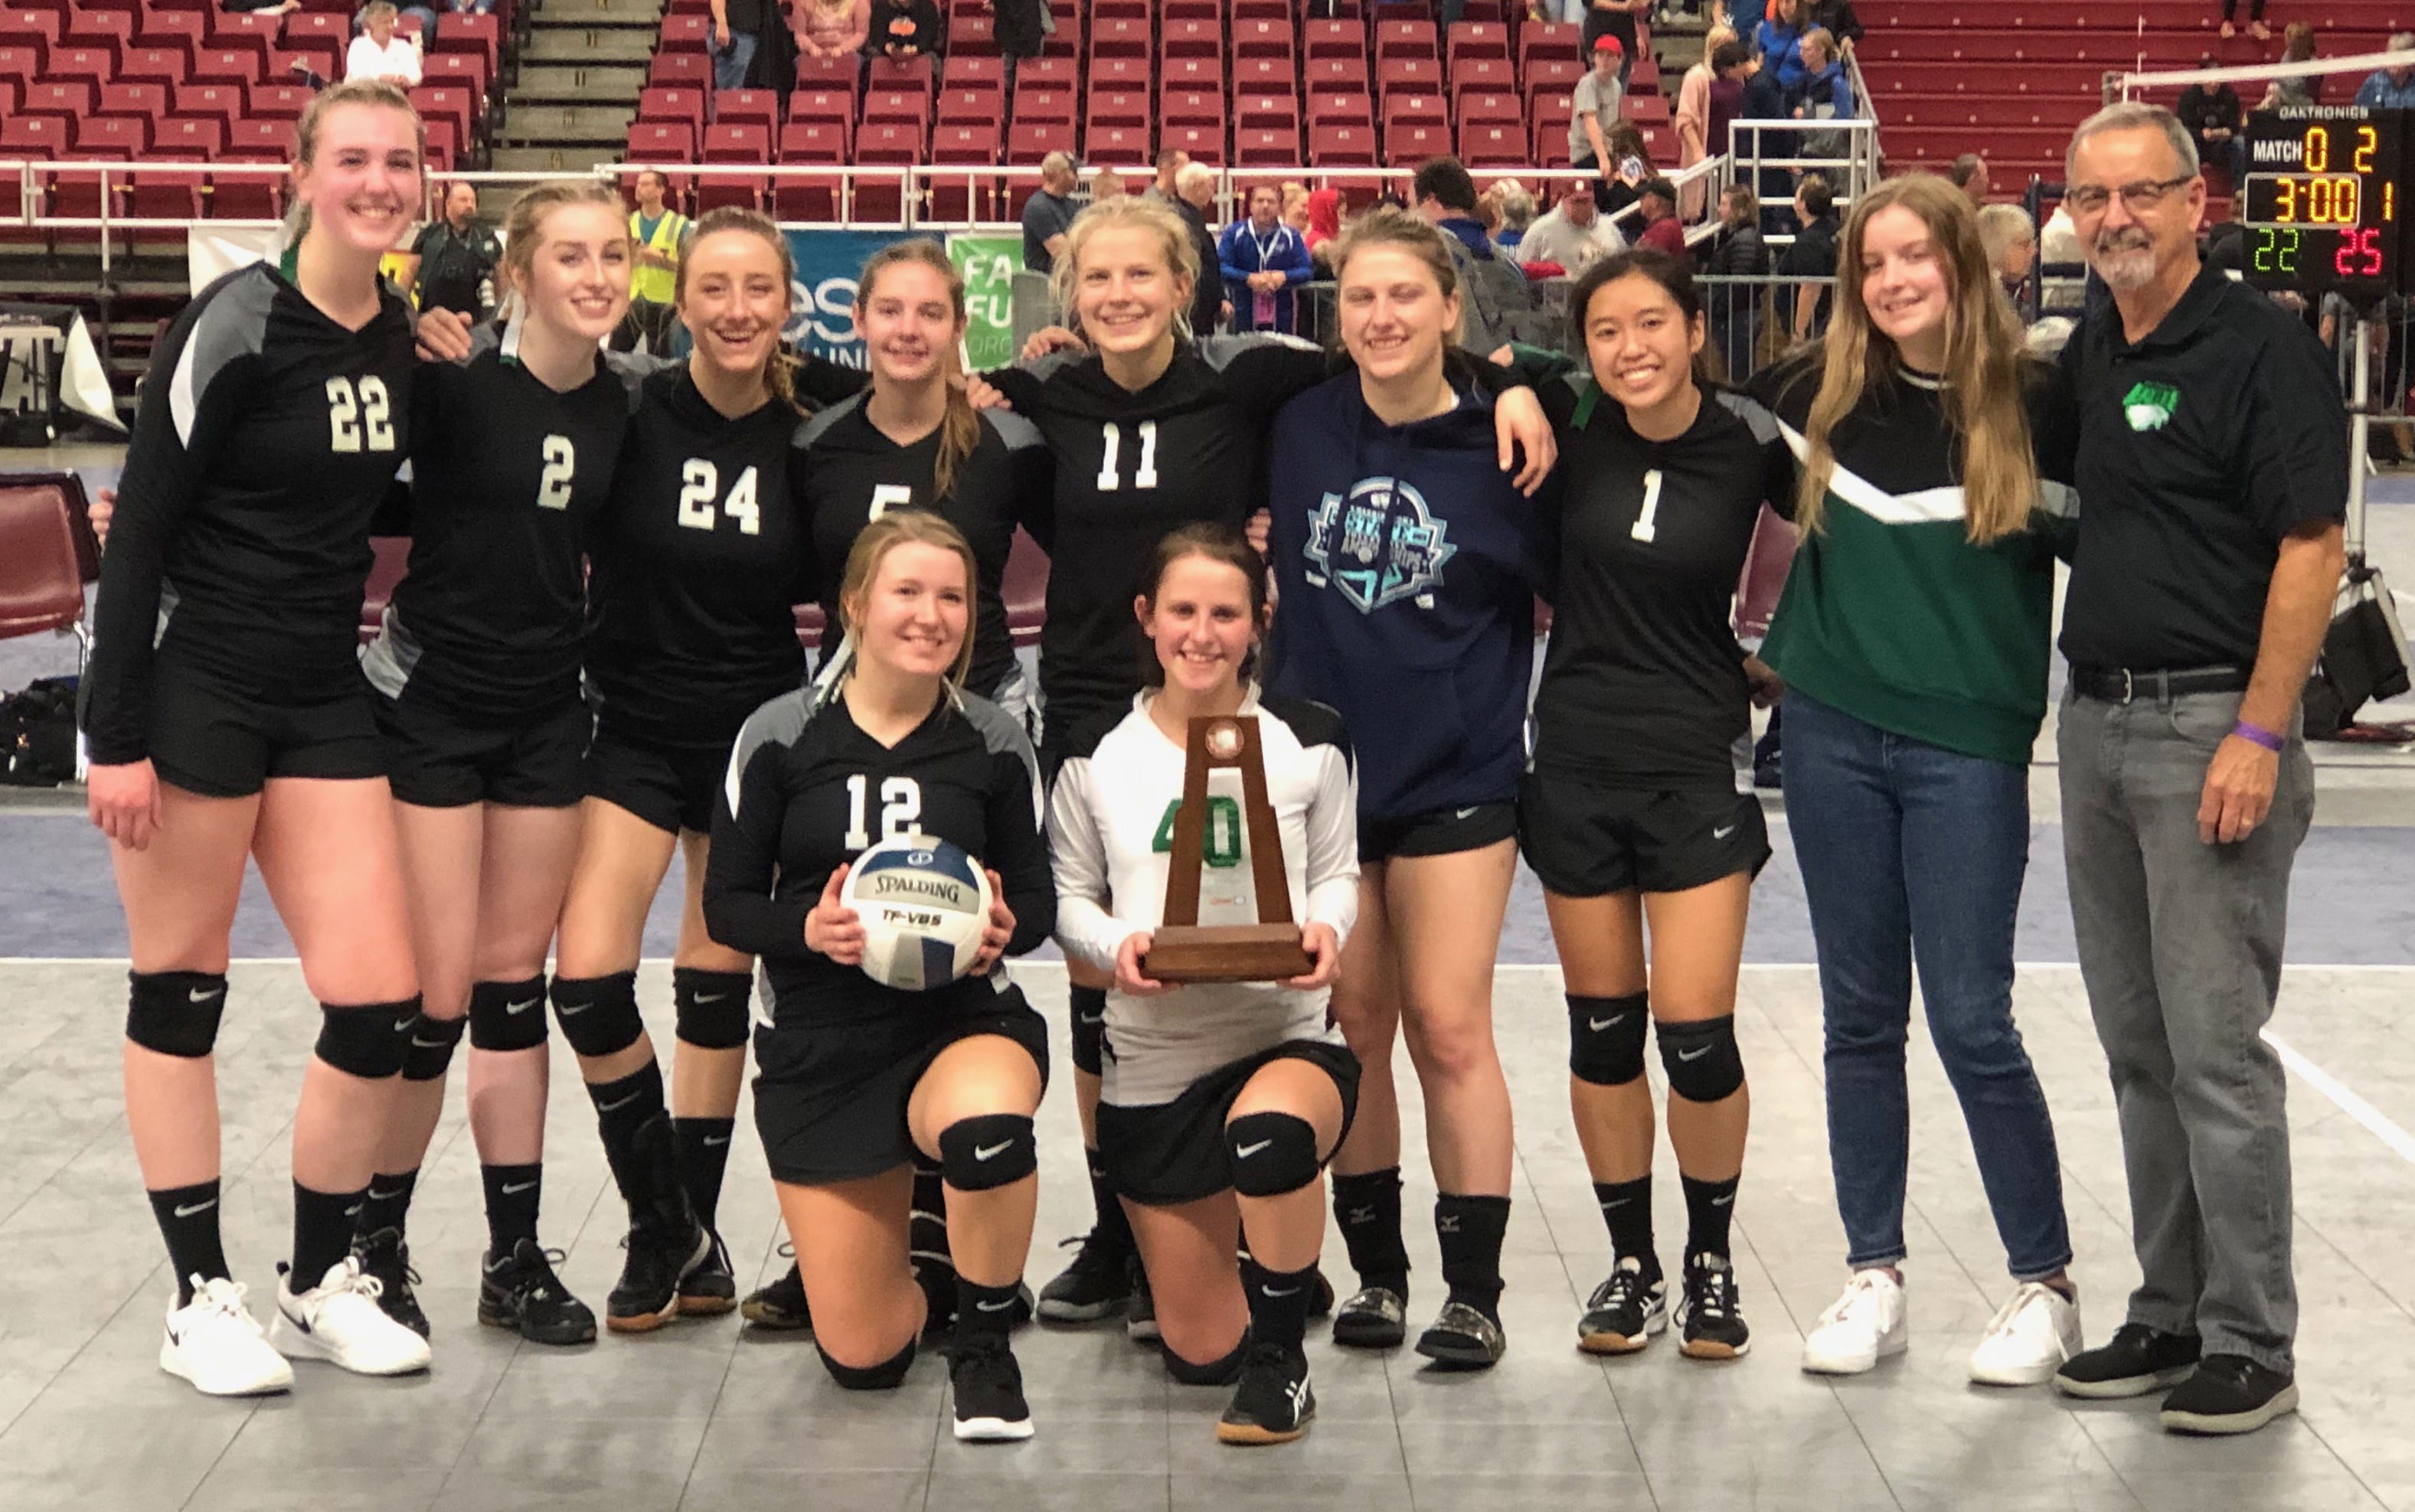 Volleyball – The Lafayette